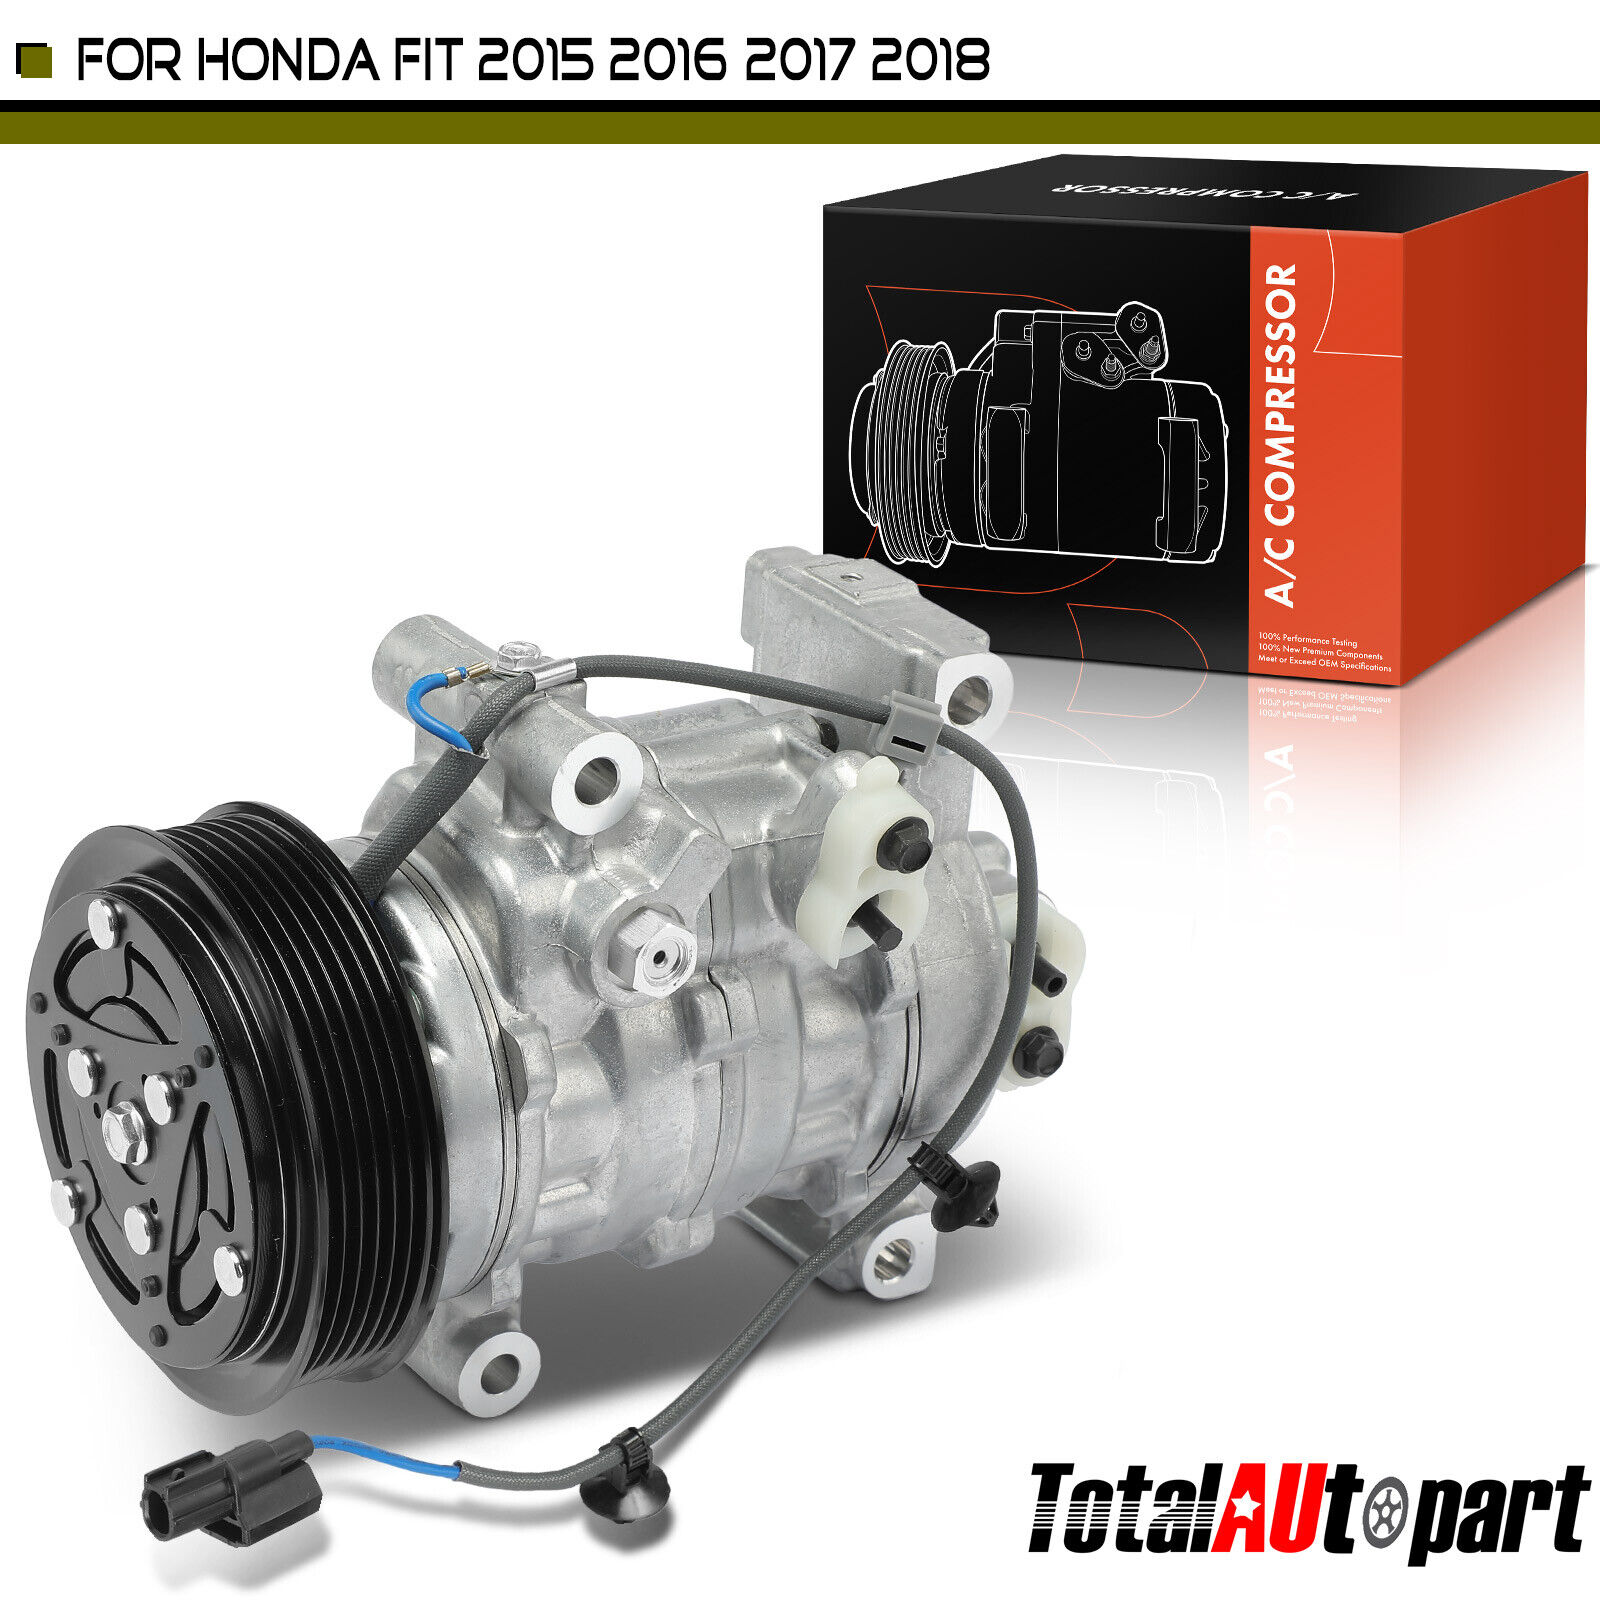 New A/C Compressor w/ Clutch for Honda Fit 2015-2018 5SE12C Style 388105R7A02